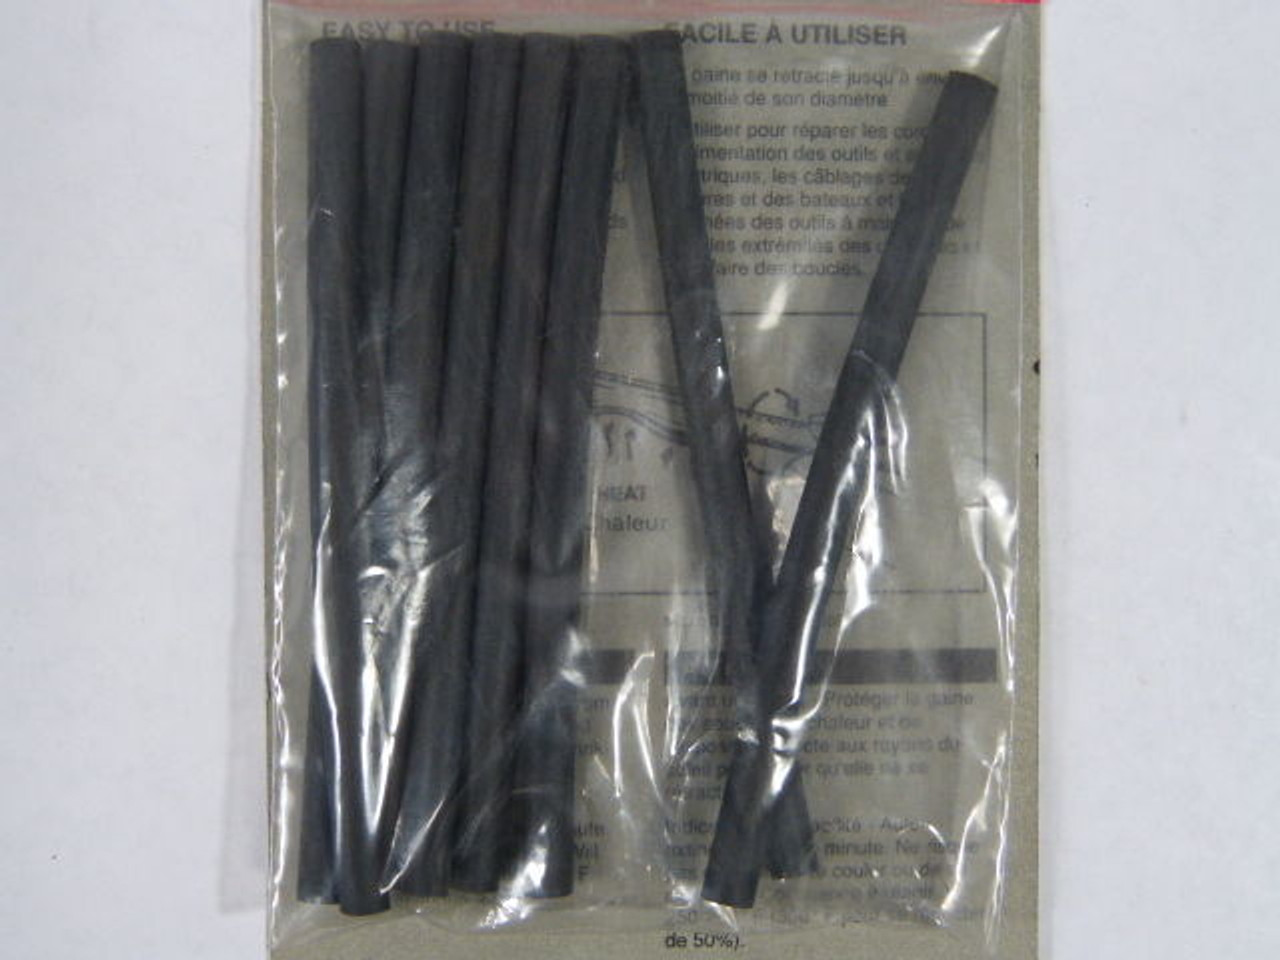 GB CHST-187 Heat Shrink Tubing 3/16" to 3/32" Bag of 8 ! NEW !